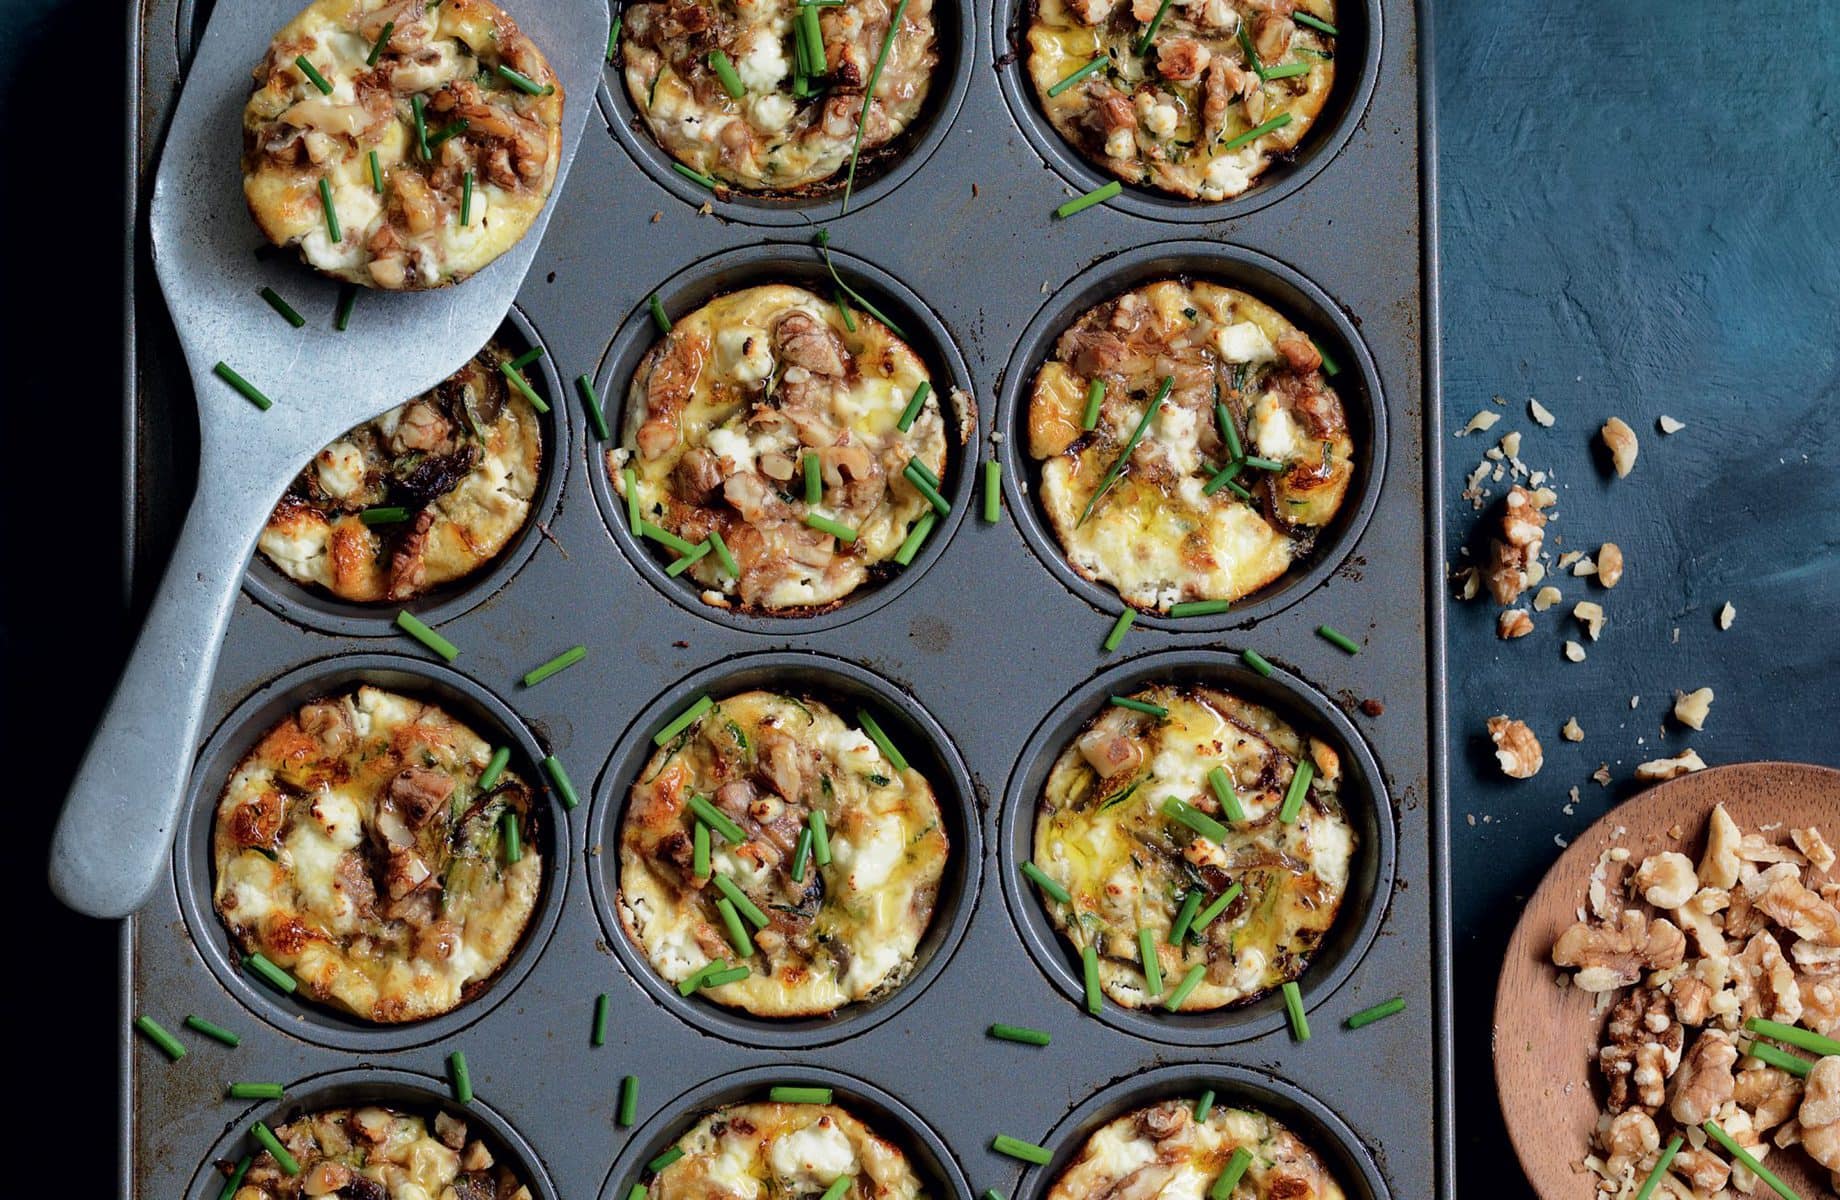 Courgette and goat’s cheese mini frittatas